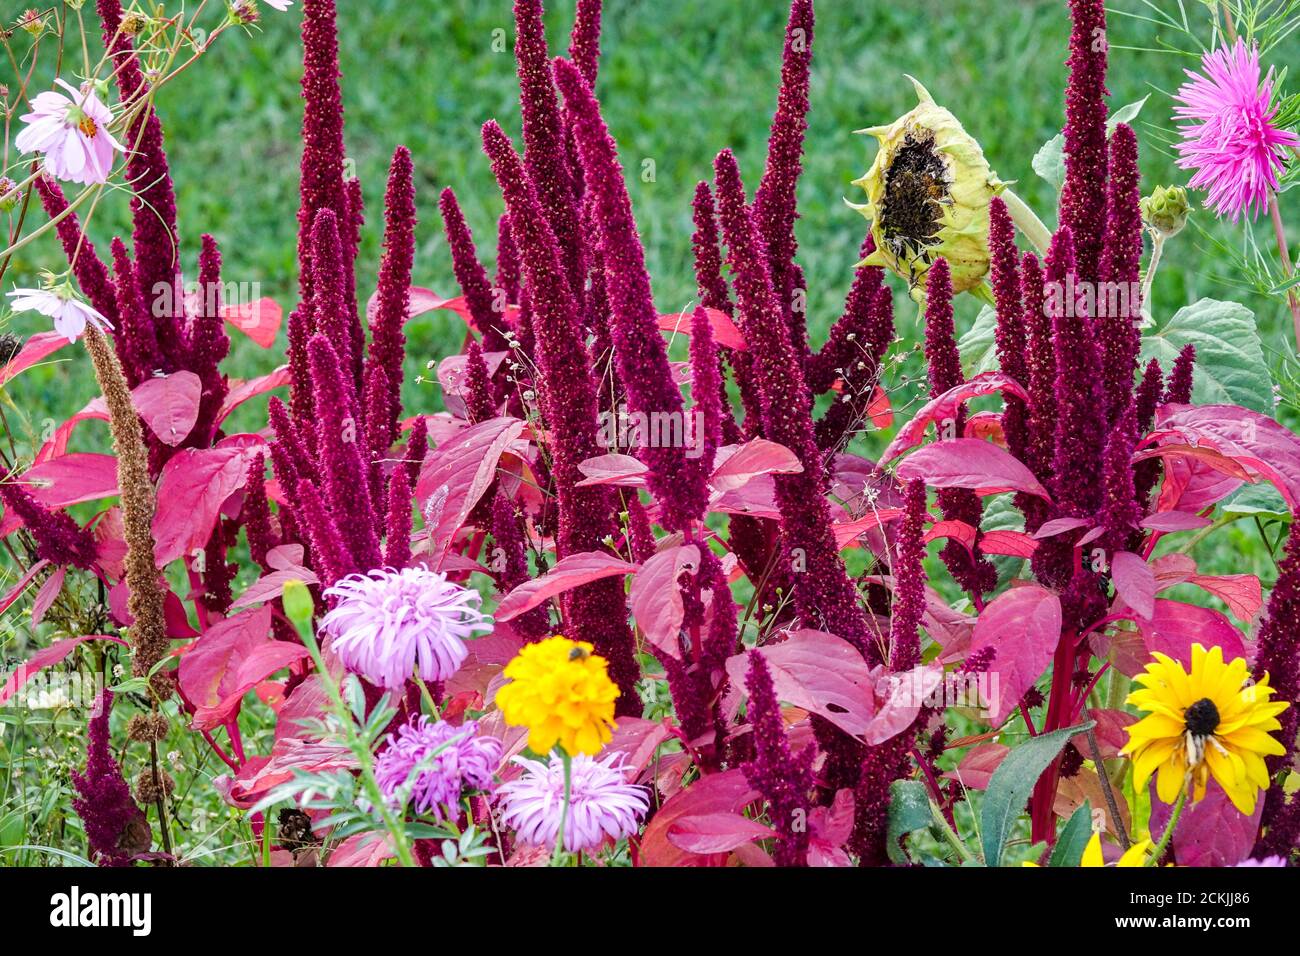 Red Amaranth flowers in colorful annual bed Stock Photo